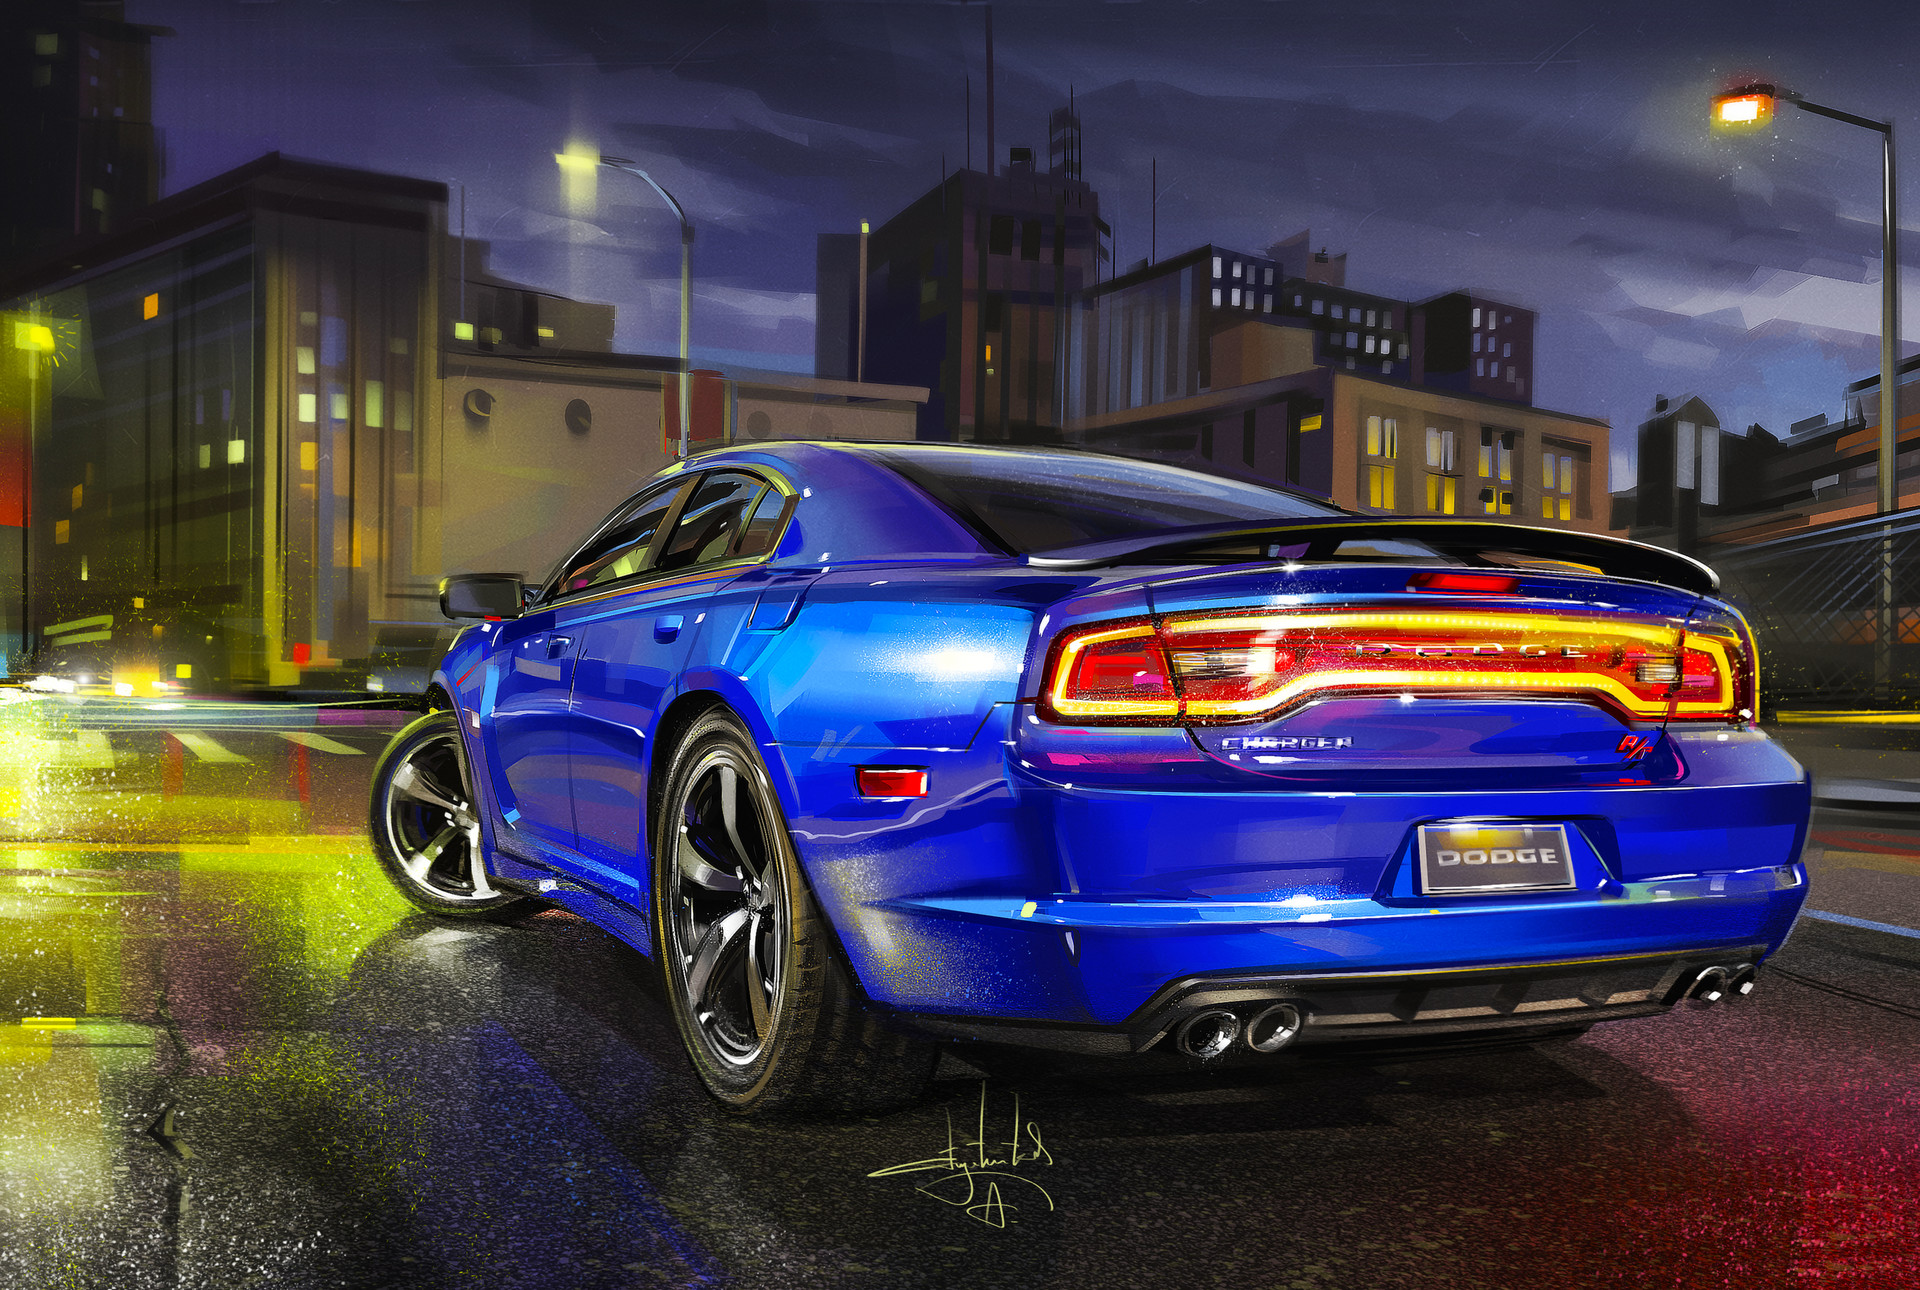 Dodge Charger R/T HD Wallpaper | Background Image | 1920x1290 | ID